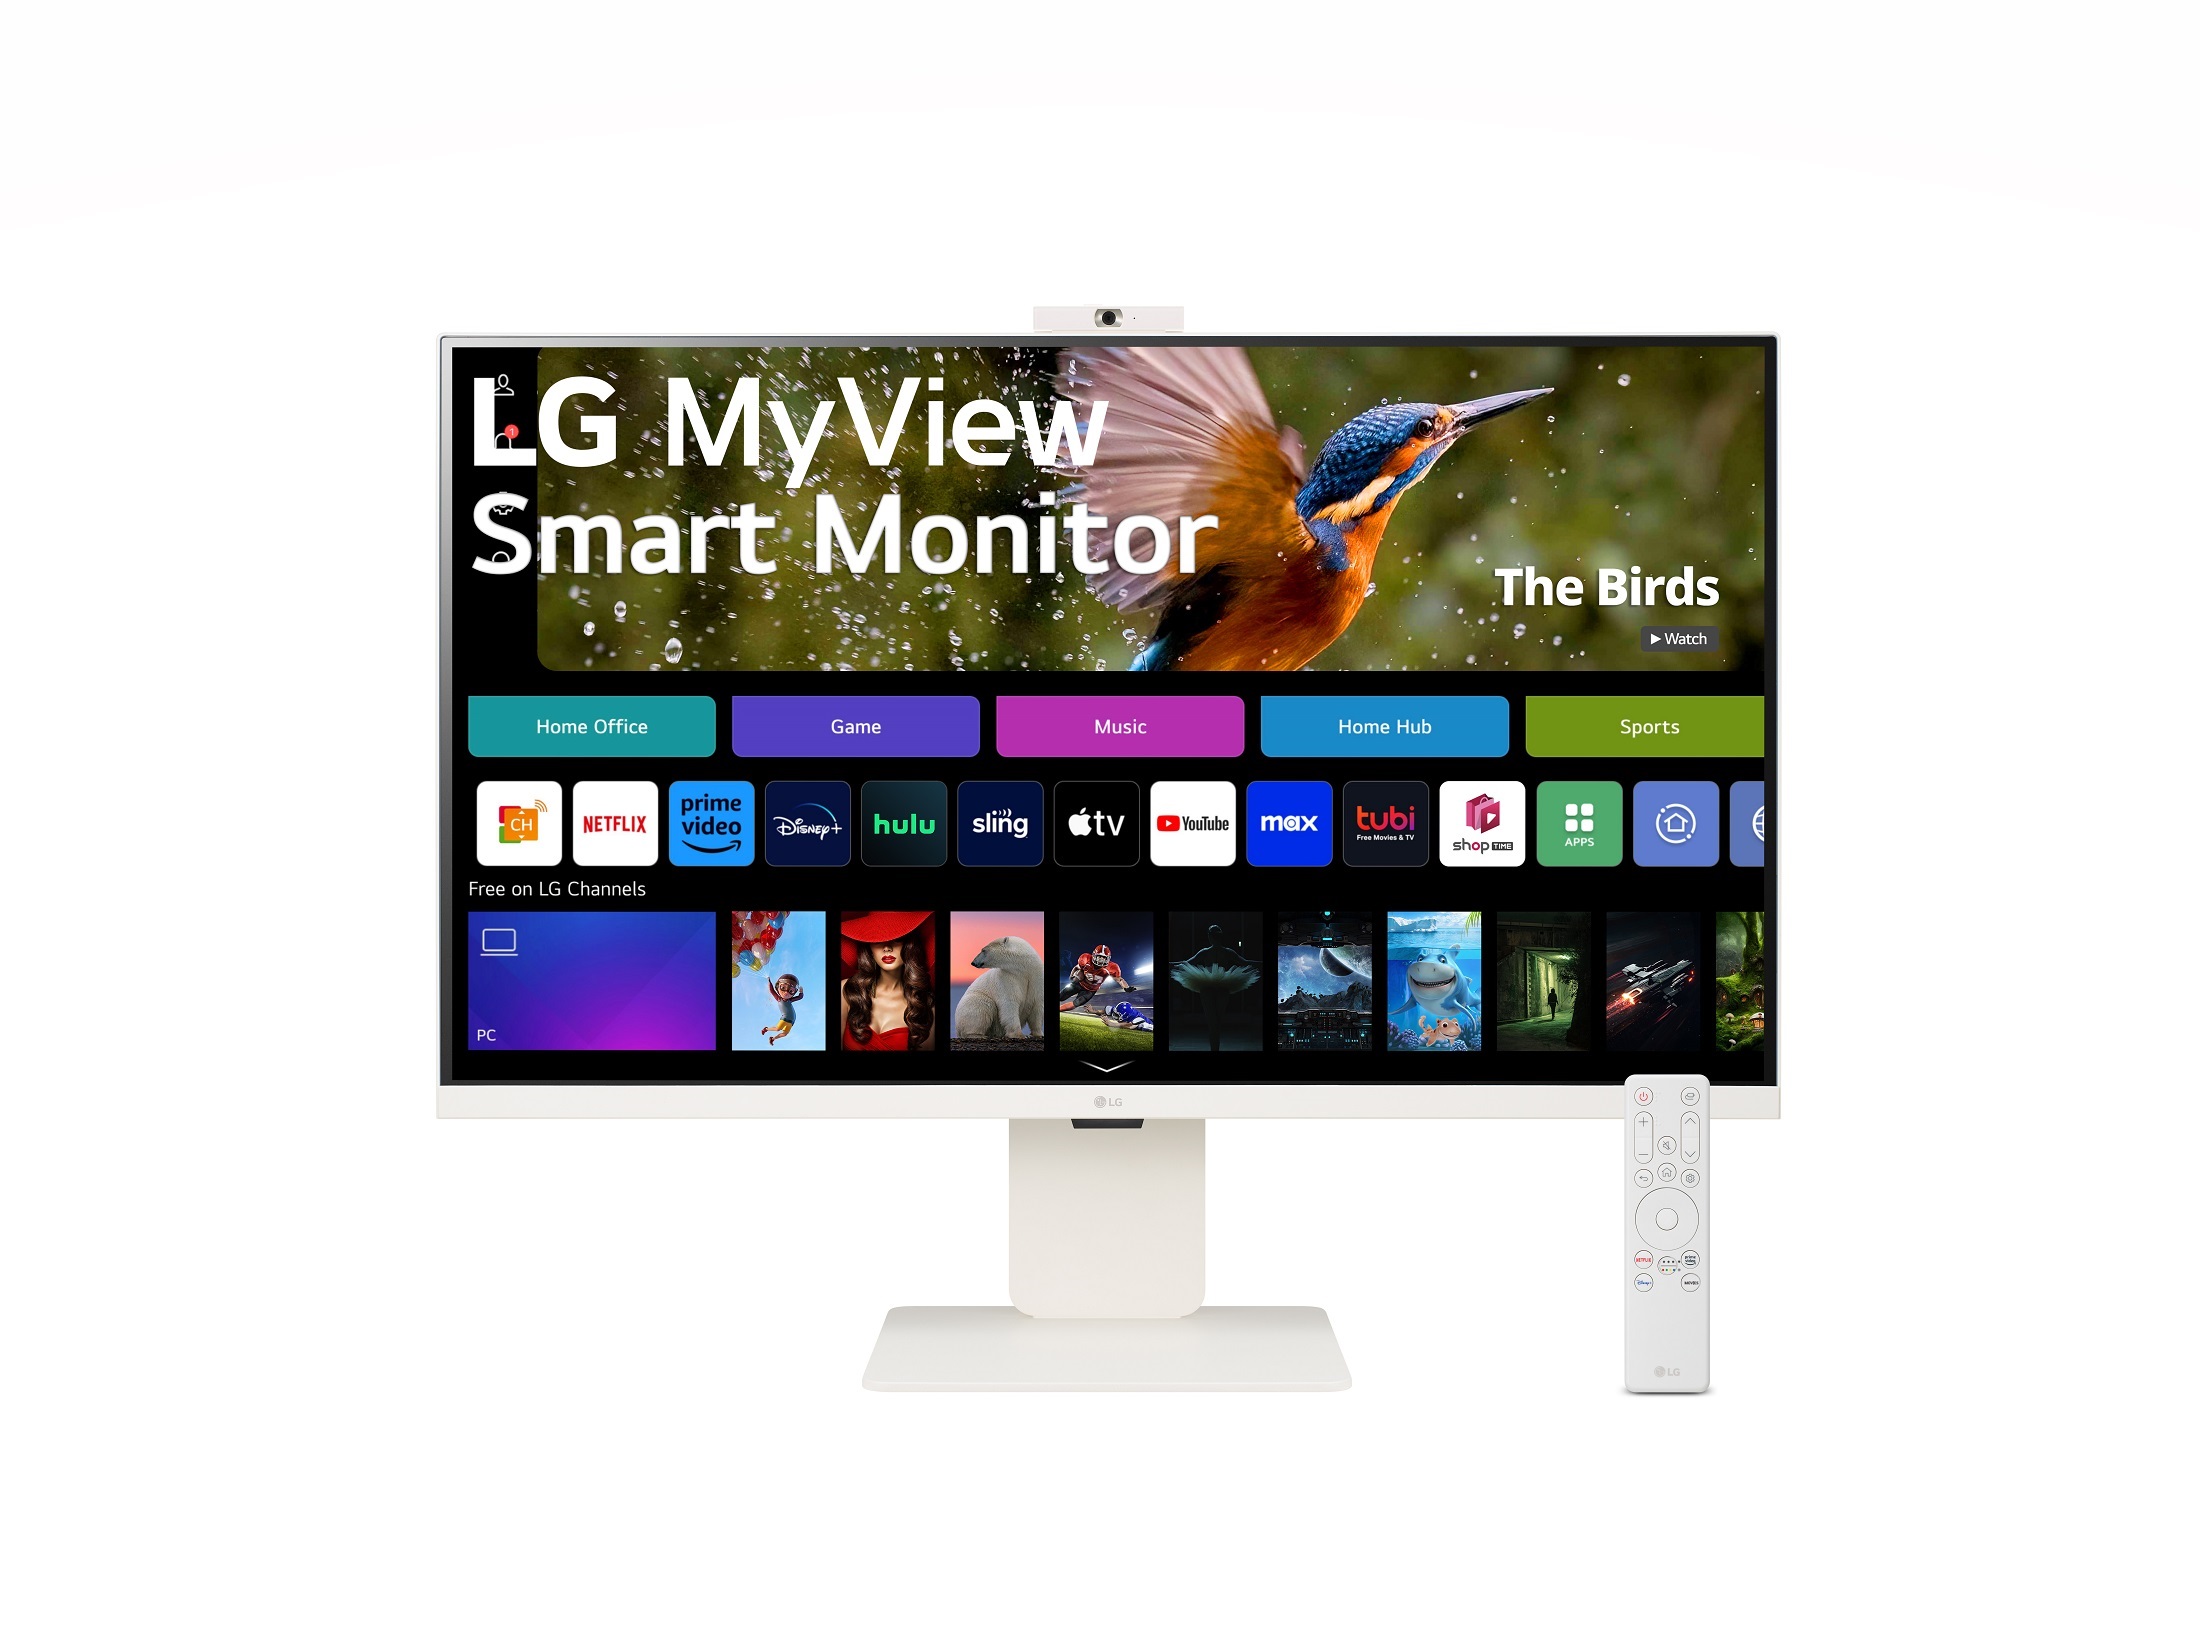 LG's 'MyView' 4K monitors have webOS built in for smart TV features